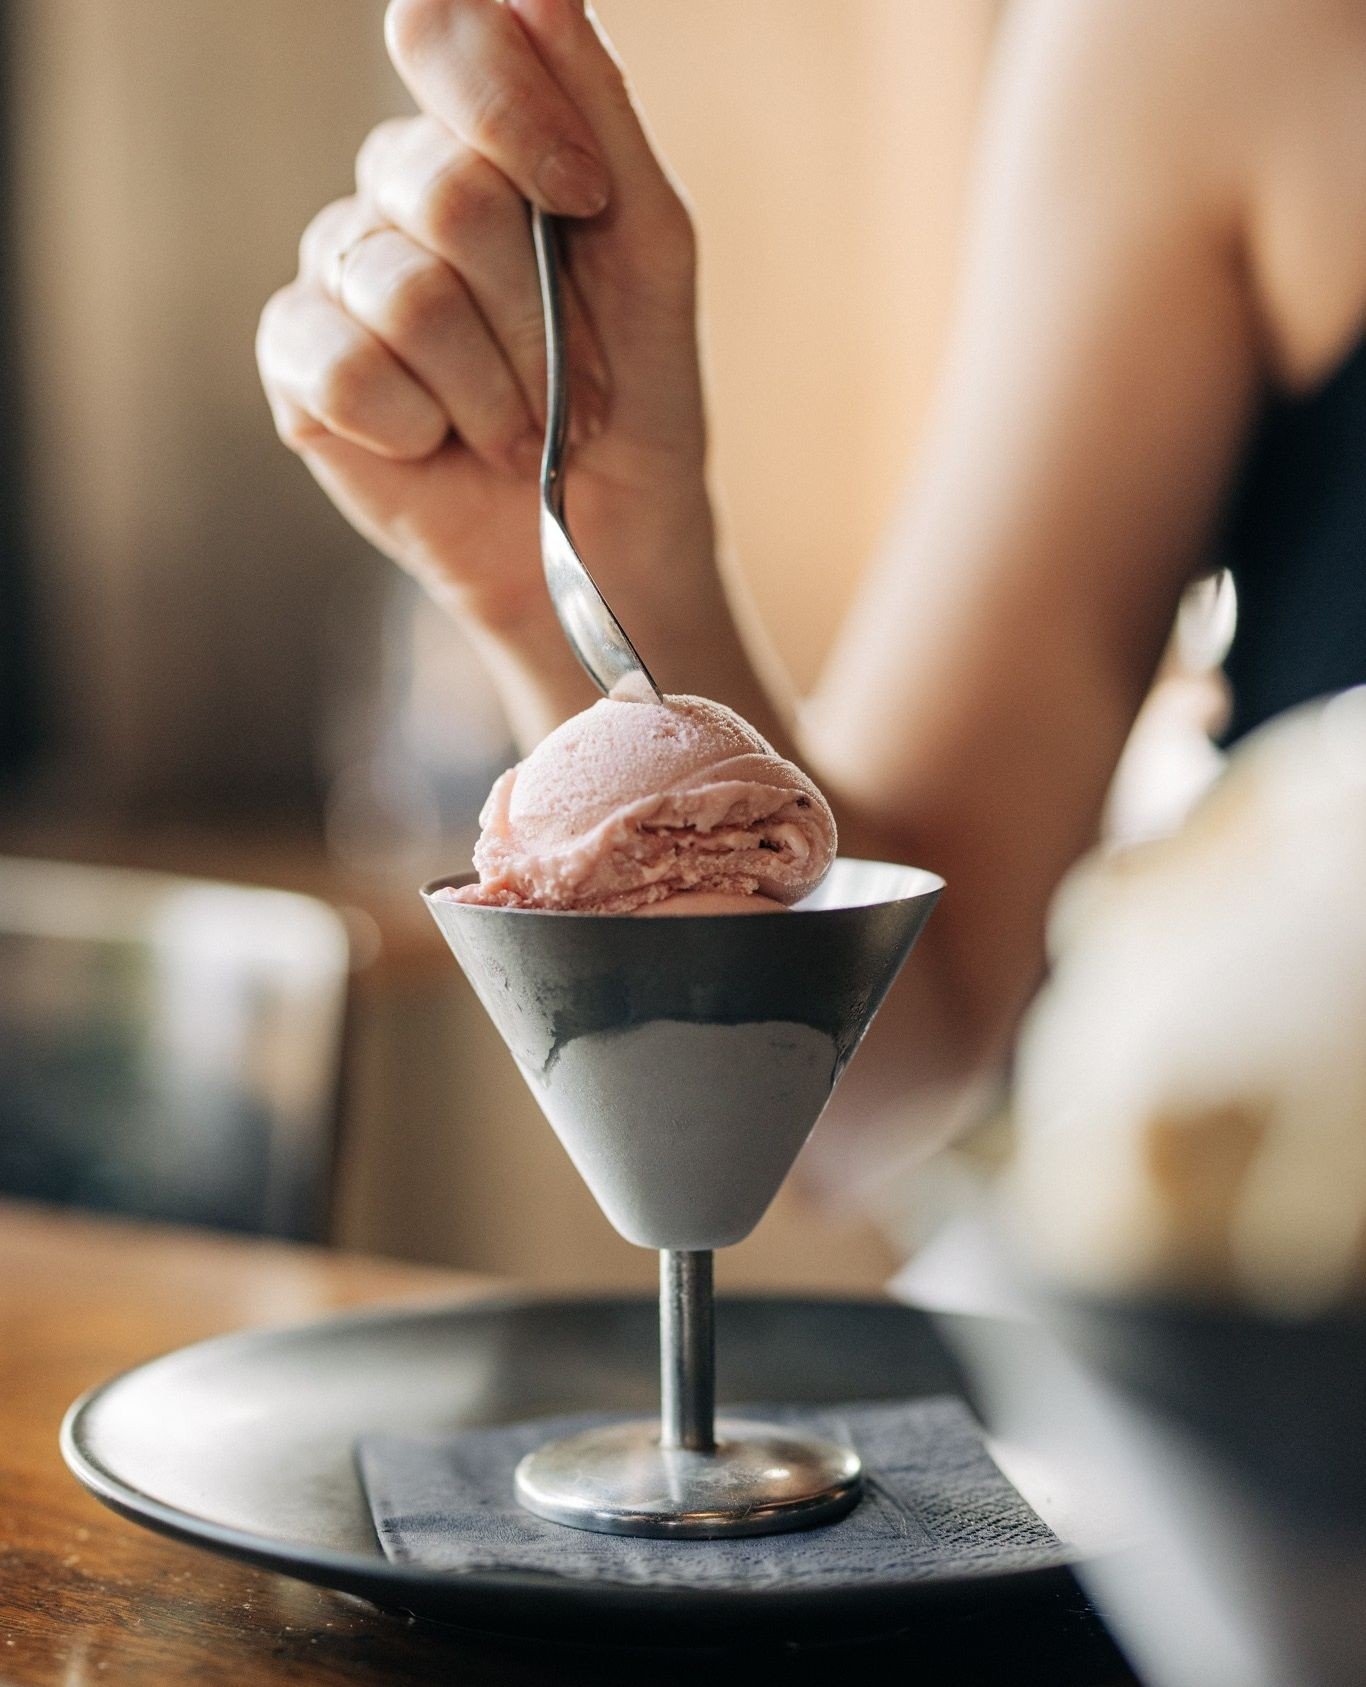 This one is for the sweet tooth! Treat yourself to our dreamy gelato flavours&hellip; the perfect ending to your meal 🍨 #parrystgarage